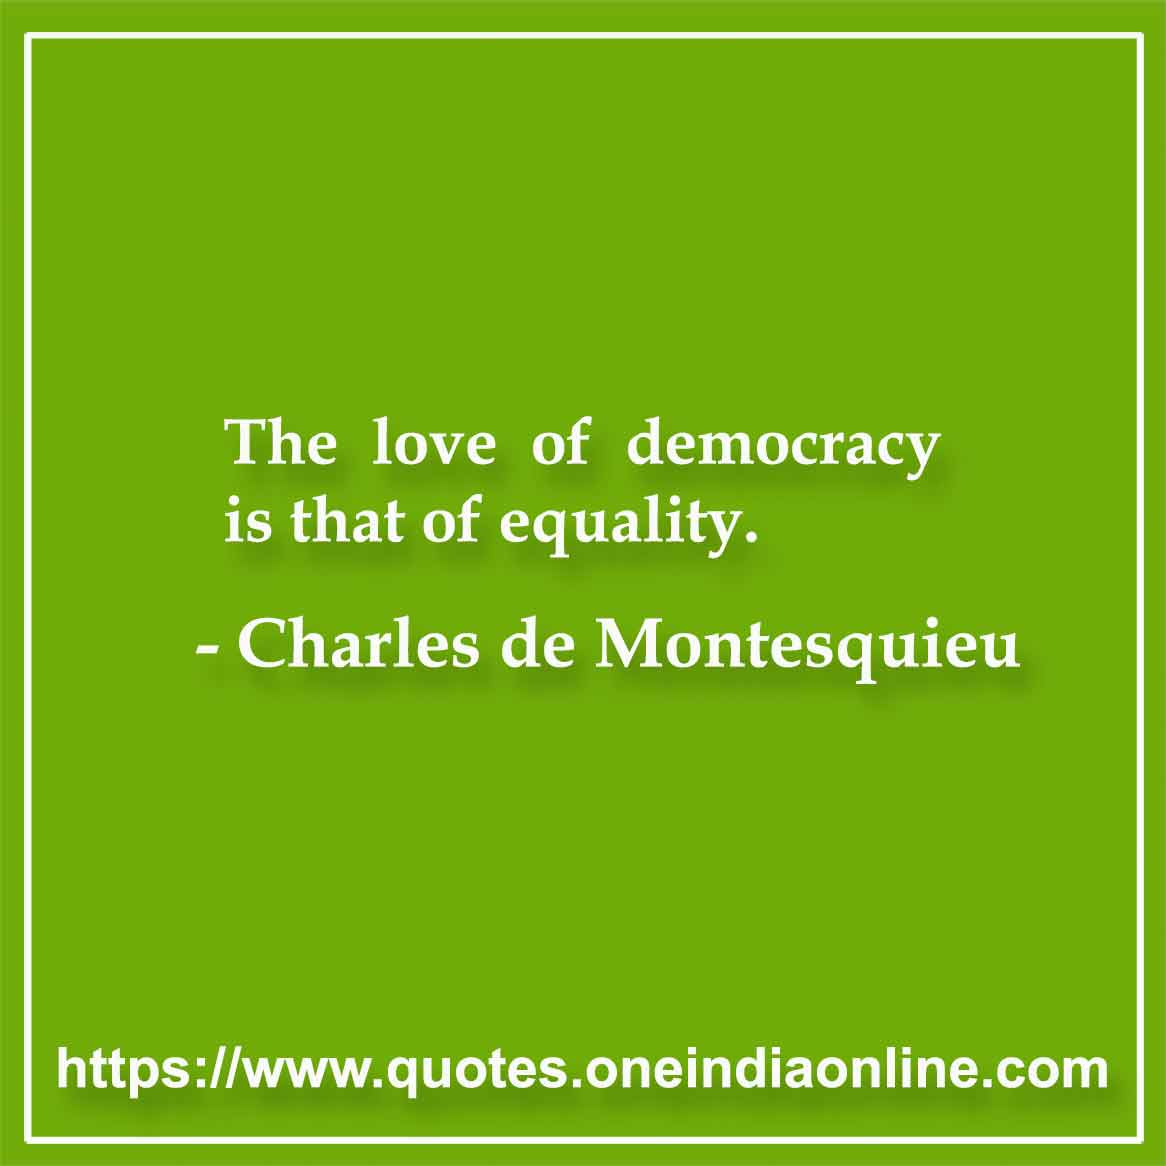 The love of democracy is that of equality. - Charles de Montesquieu 